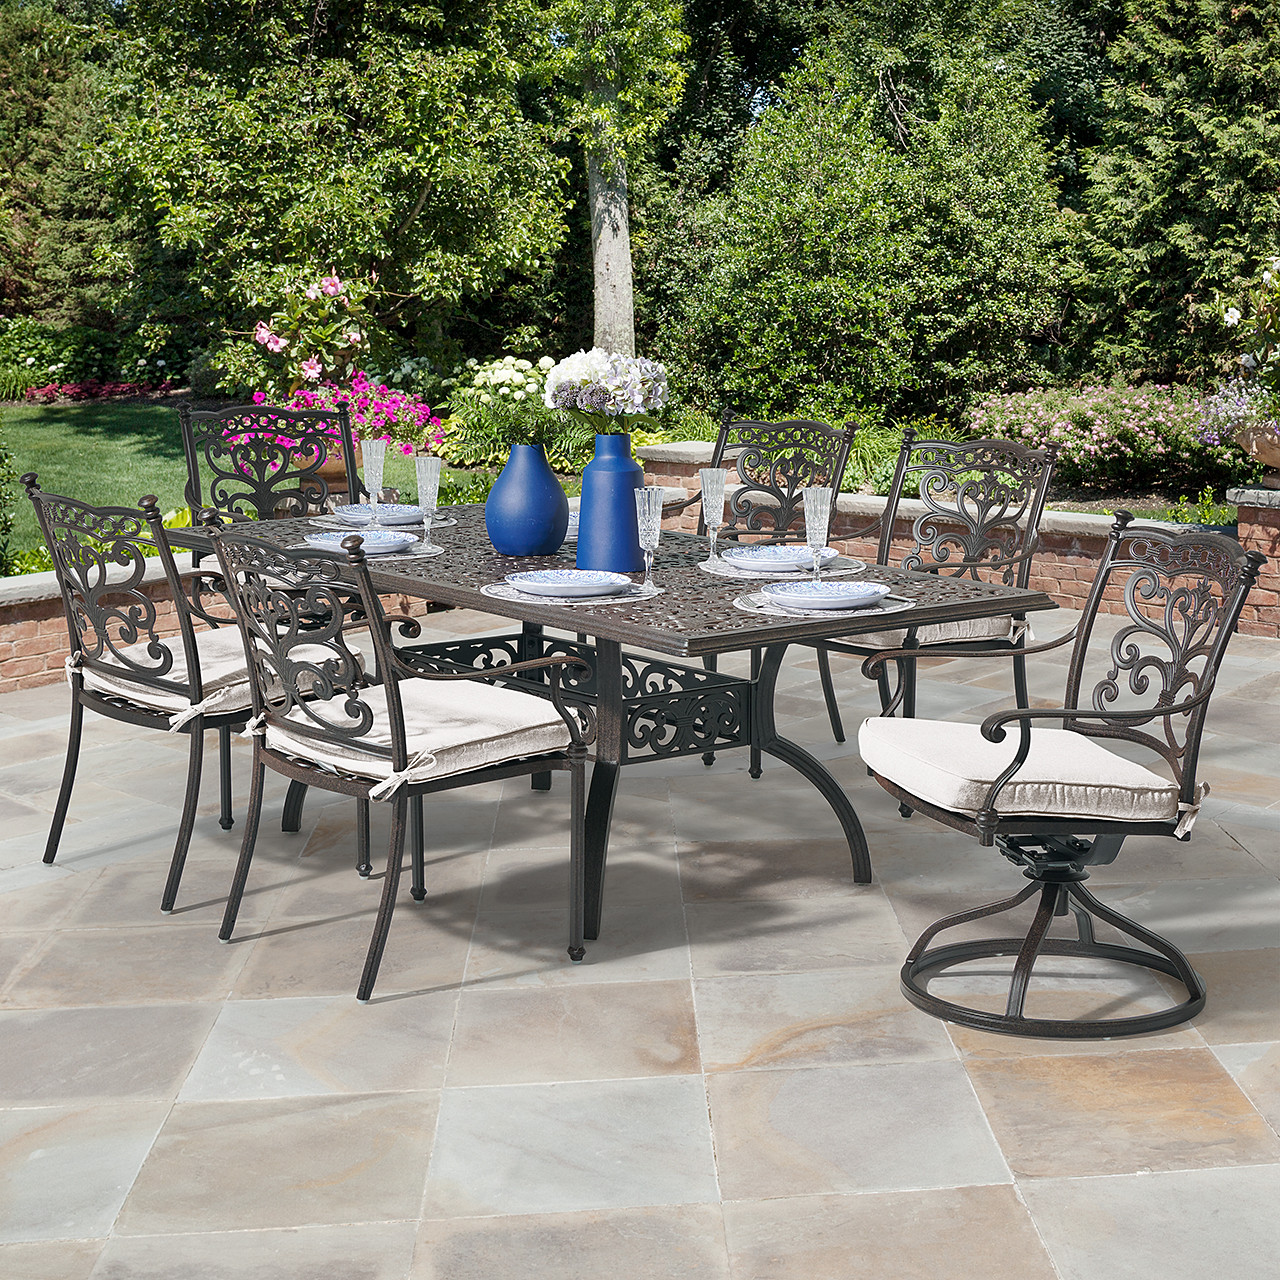 Milan Aged Bronze Cast Aluminum with Cushions 7 Piece Swivel Combo Dining Set + 84 x 42 in. Table